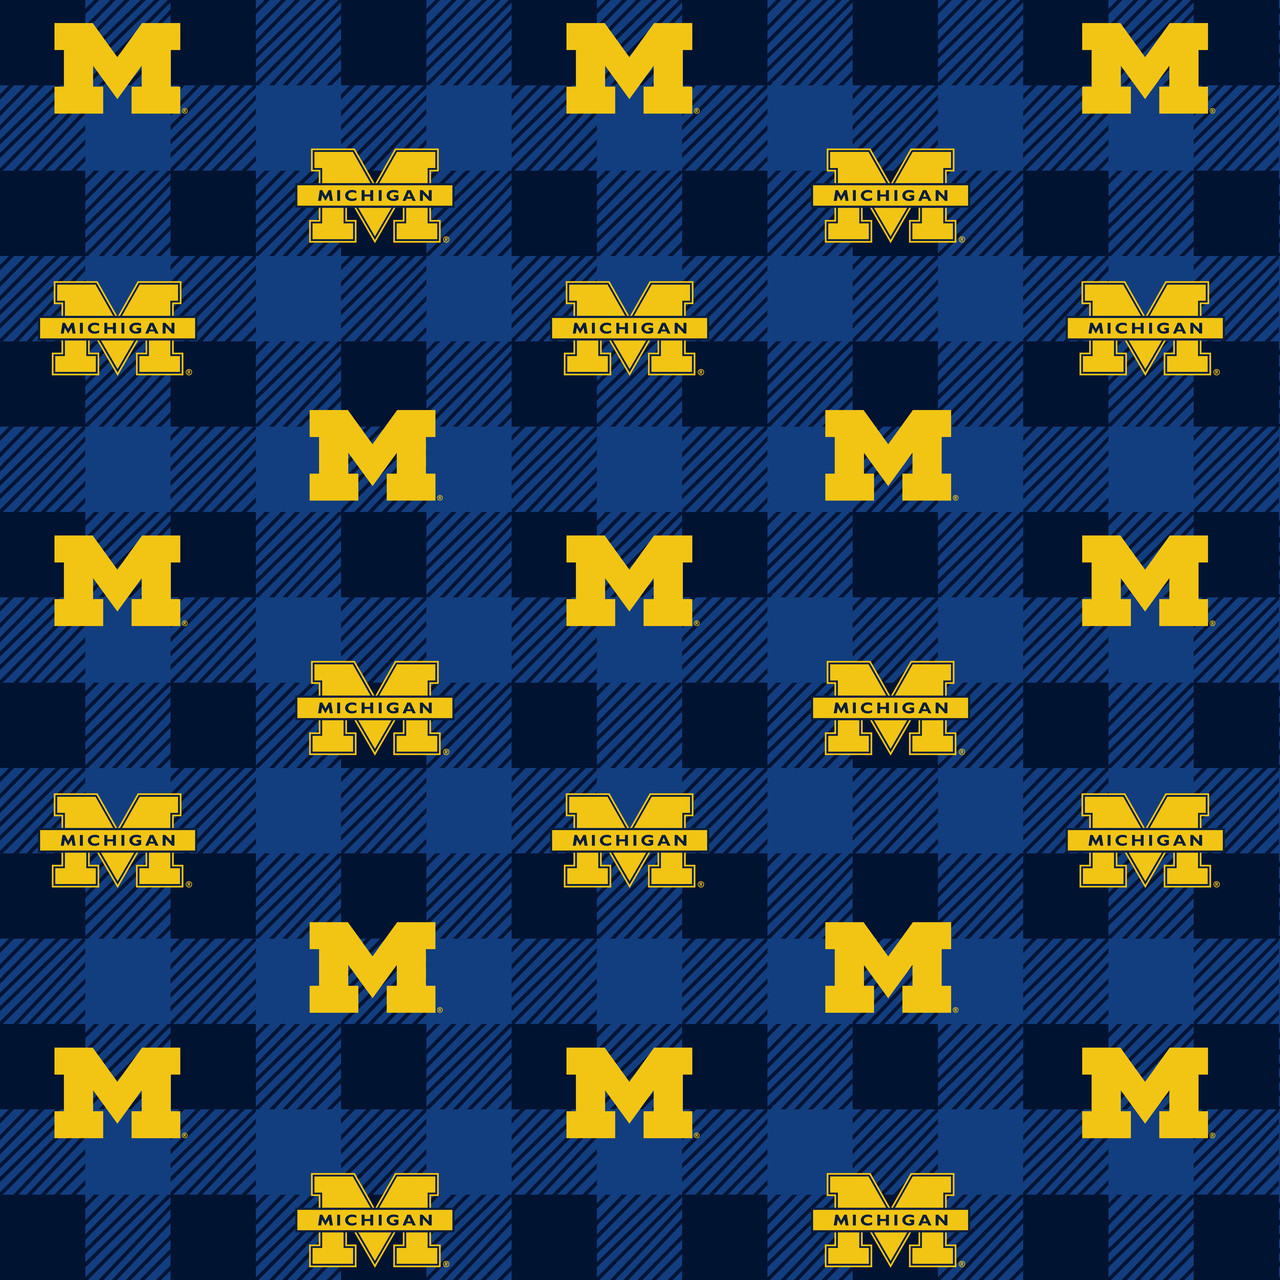 Michigan Wolverines Fleece Fabric with Buffalo Plaid design-Sold by the Yard